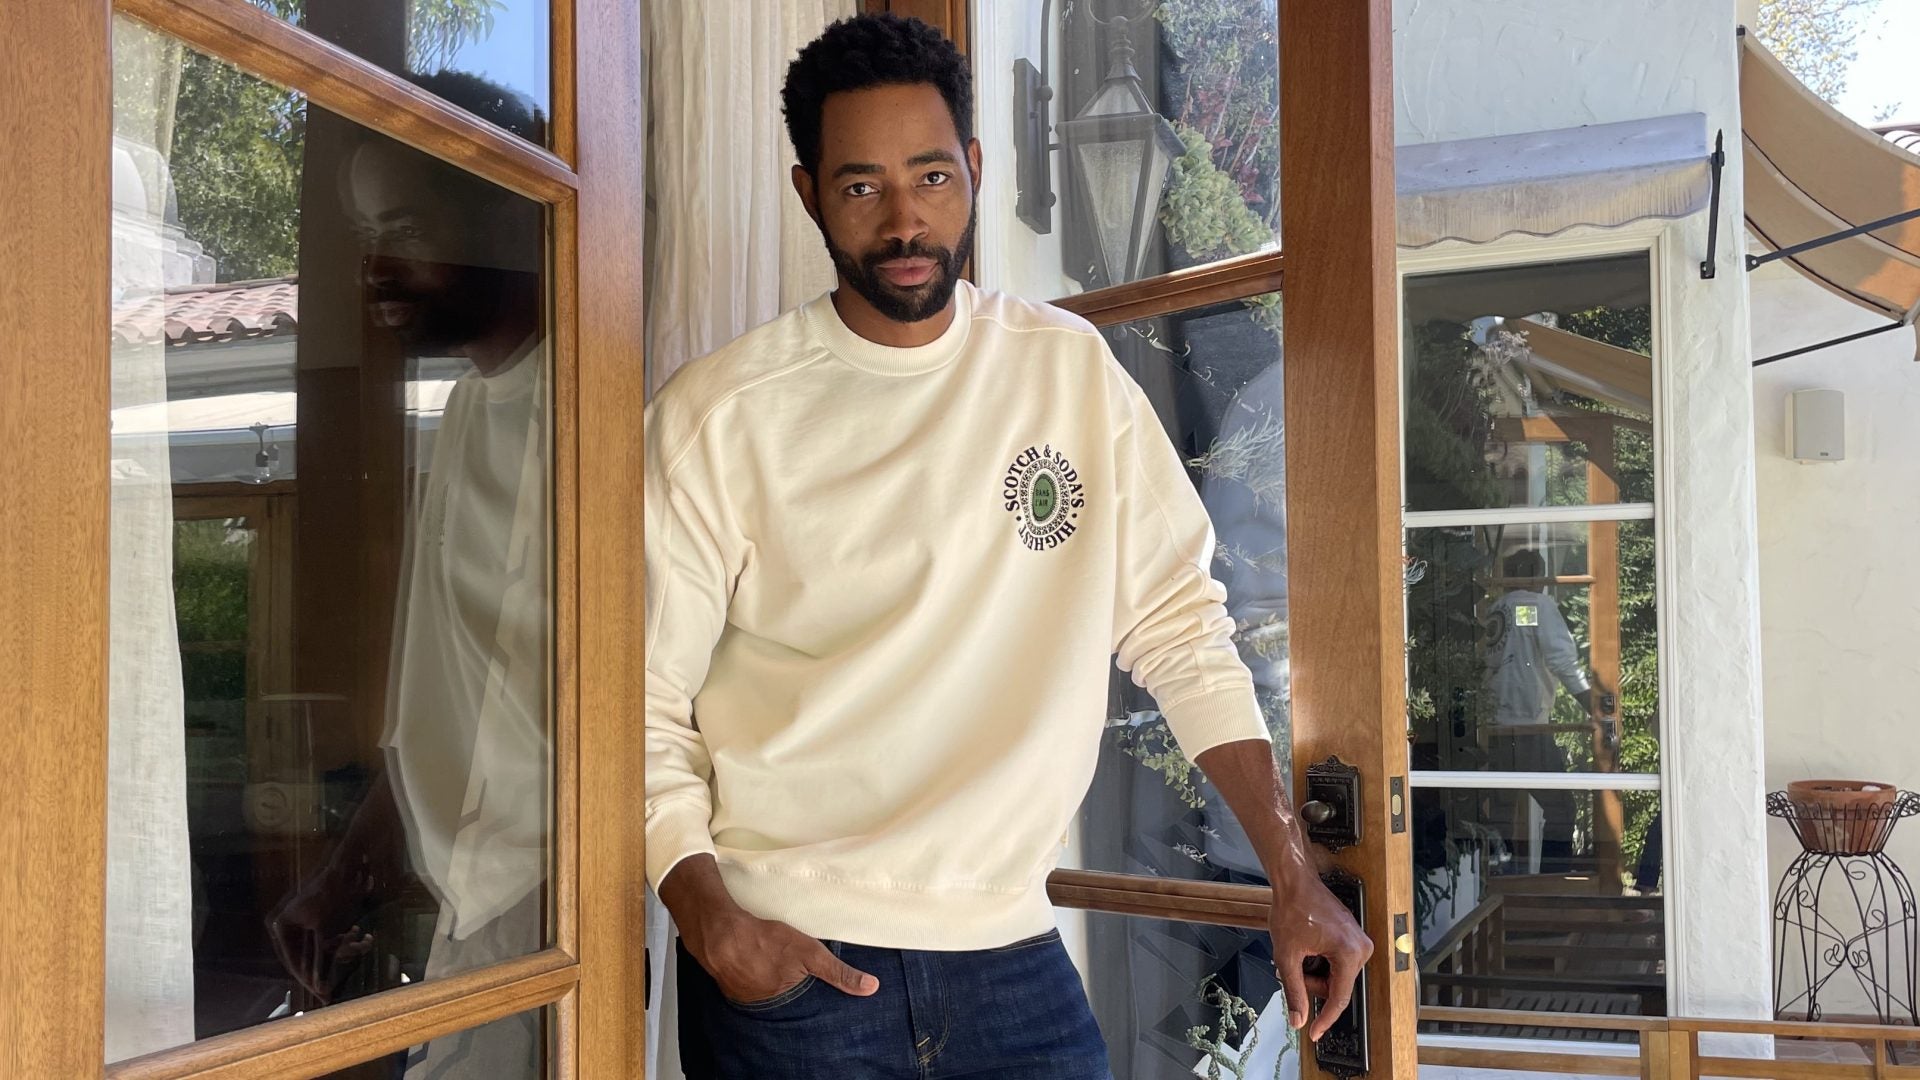 Won't He Do It! Lawrence Got A Job And Found Some Fashion Sense—According To 'Insecure' Actor Jay Ellis